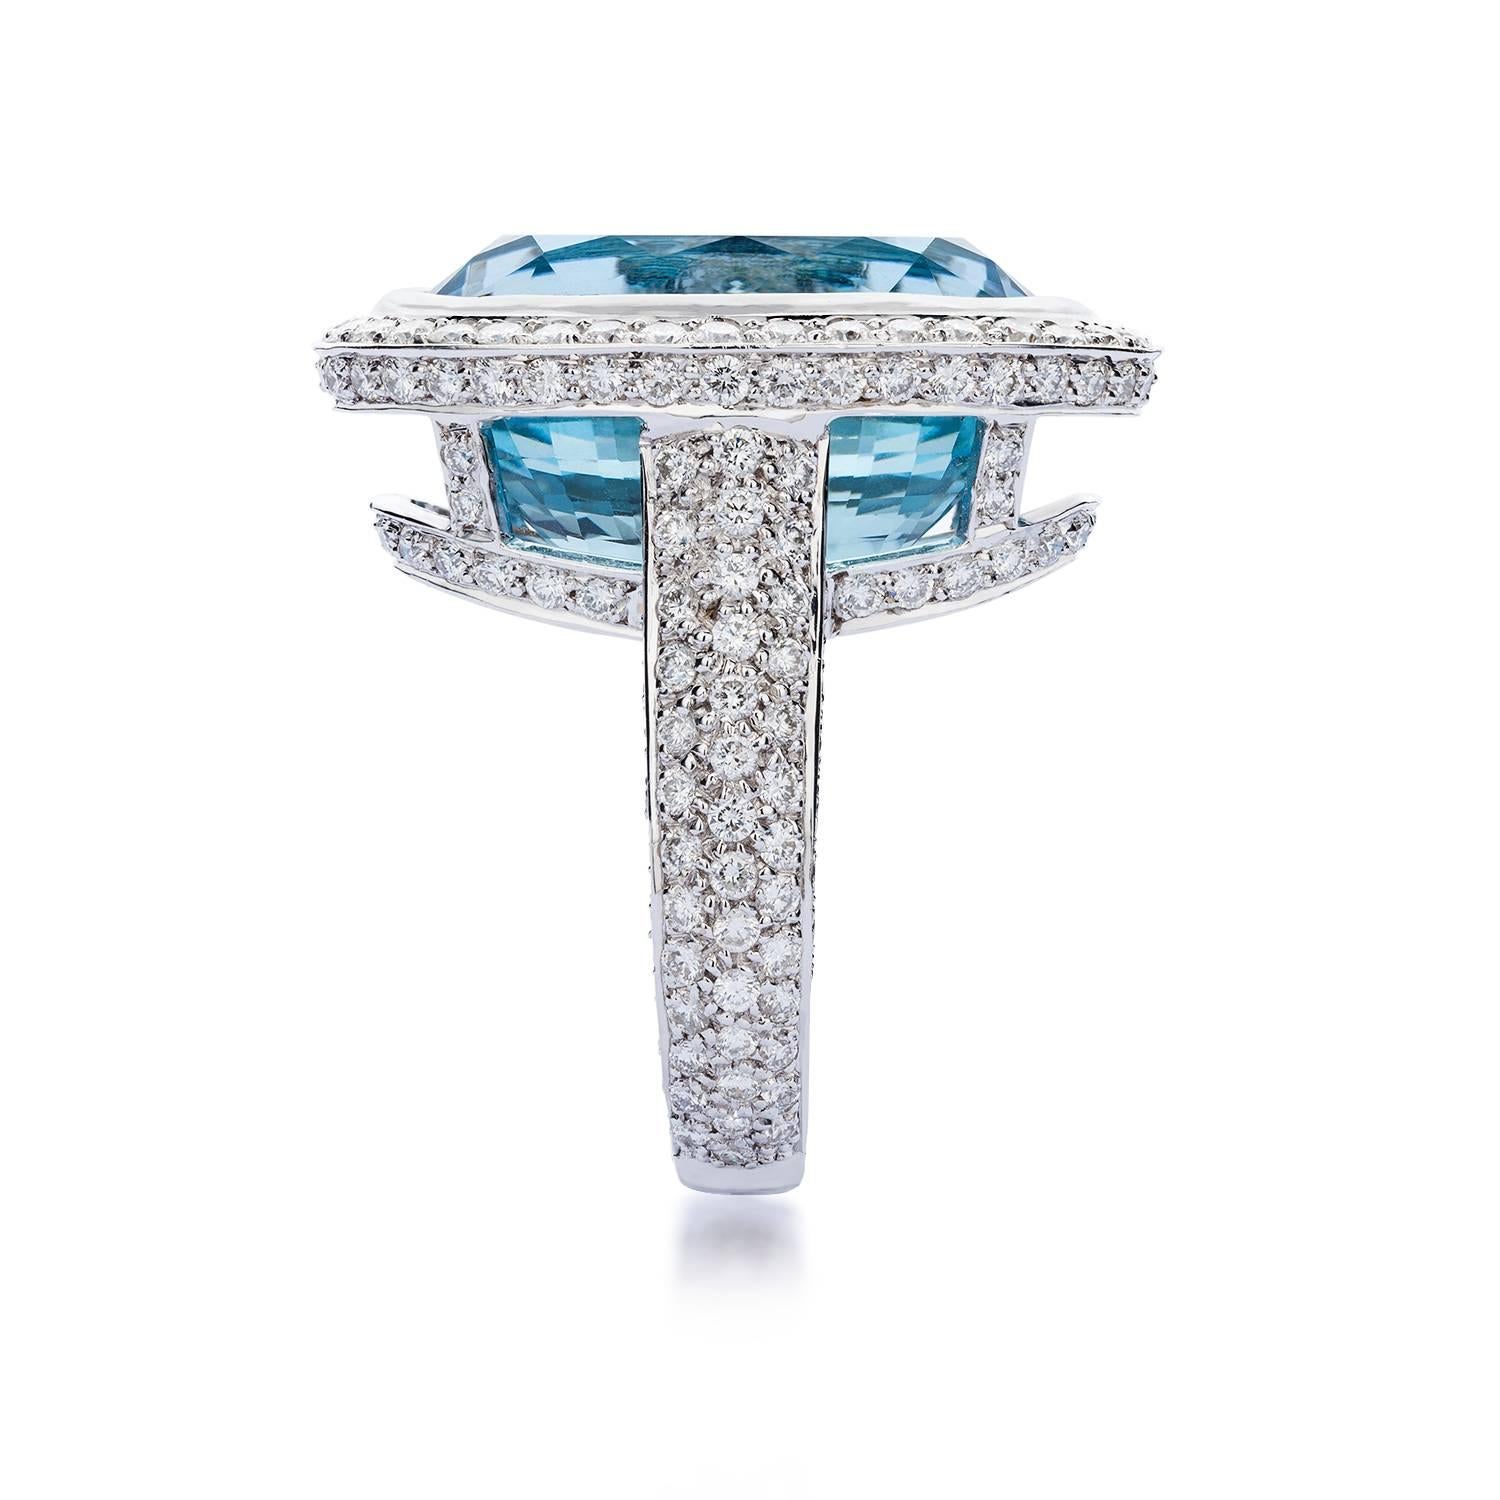 This is a Lings One-Of-A-Kind ring, a design that is made unique by an exceptional 15.45cts oval cut aquamarine with an intense ocean blue hue.

The carefully crafted setting features round brilliant cut diamonds individually claw-set so that it